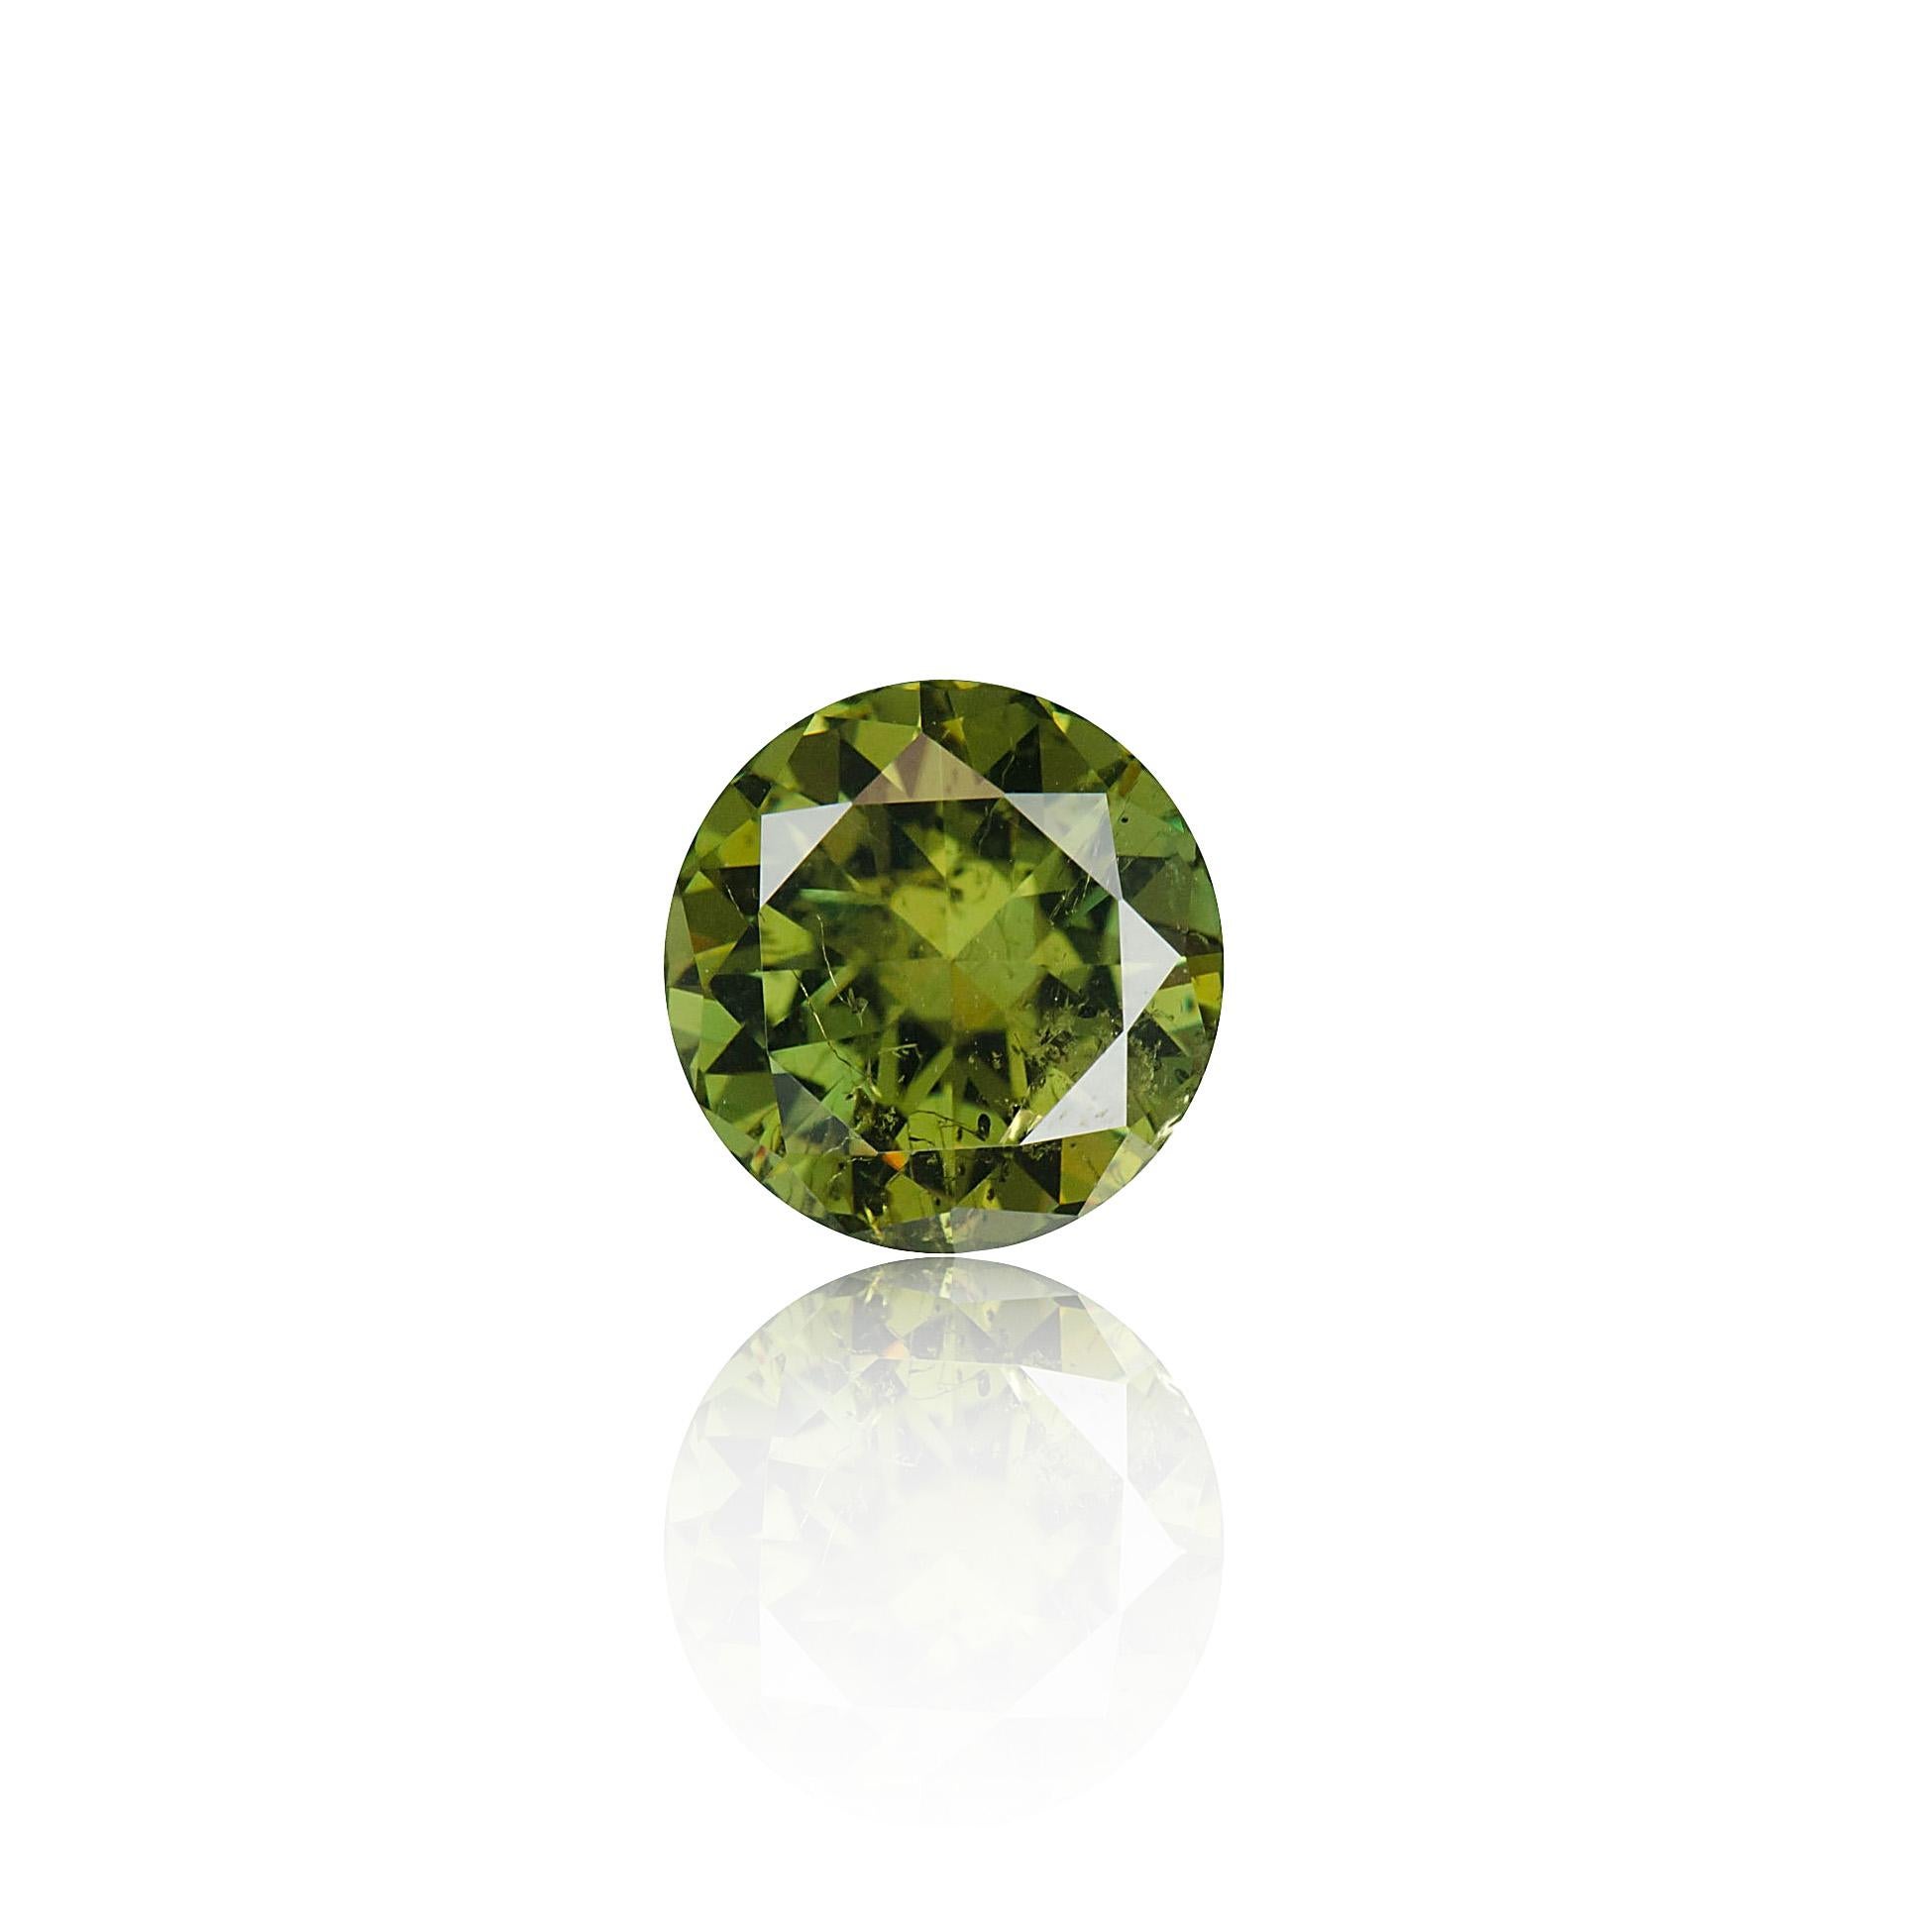 This tremendous over 12.50 carat green-brown round cut garnet var. demantoid from Madagascar displays a few horsetail inclusions. Commonly found in this rare species of garnet, the inclusions far from detract from the demantoid's intense sparkle and